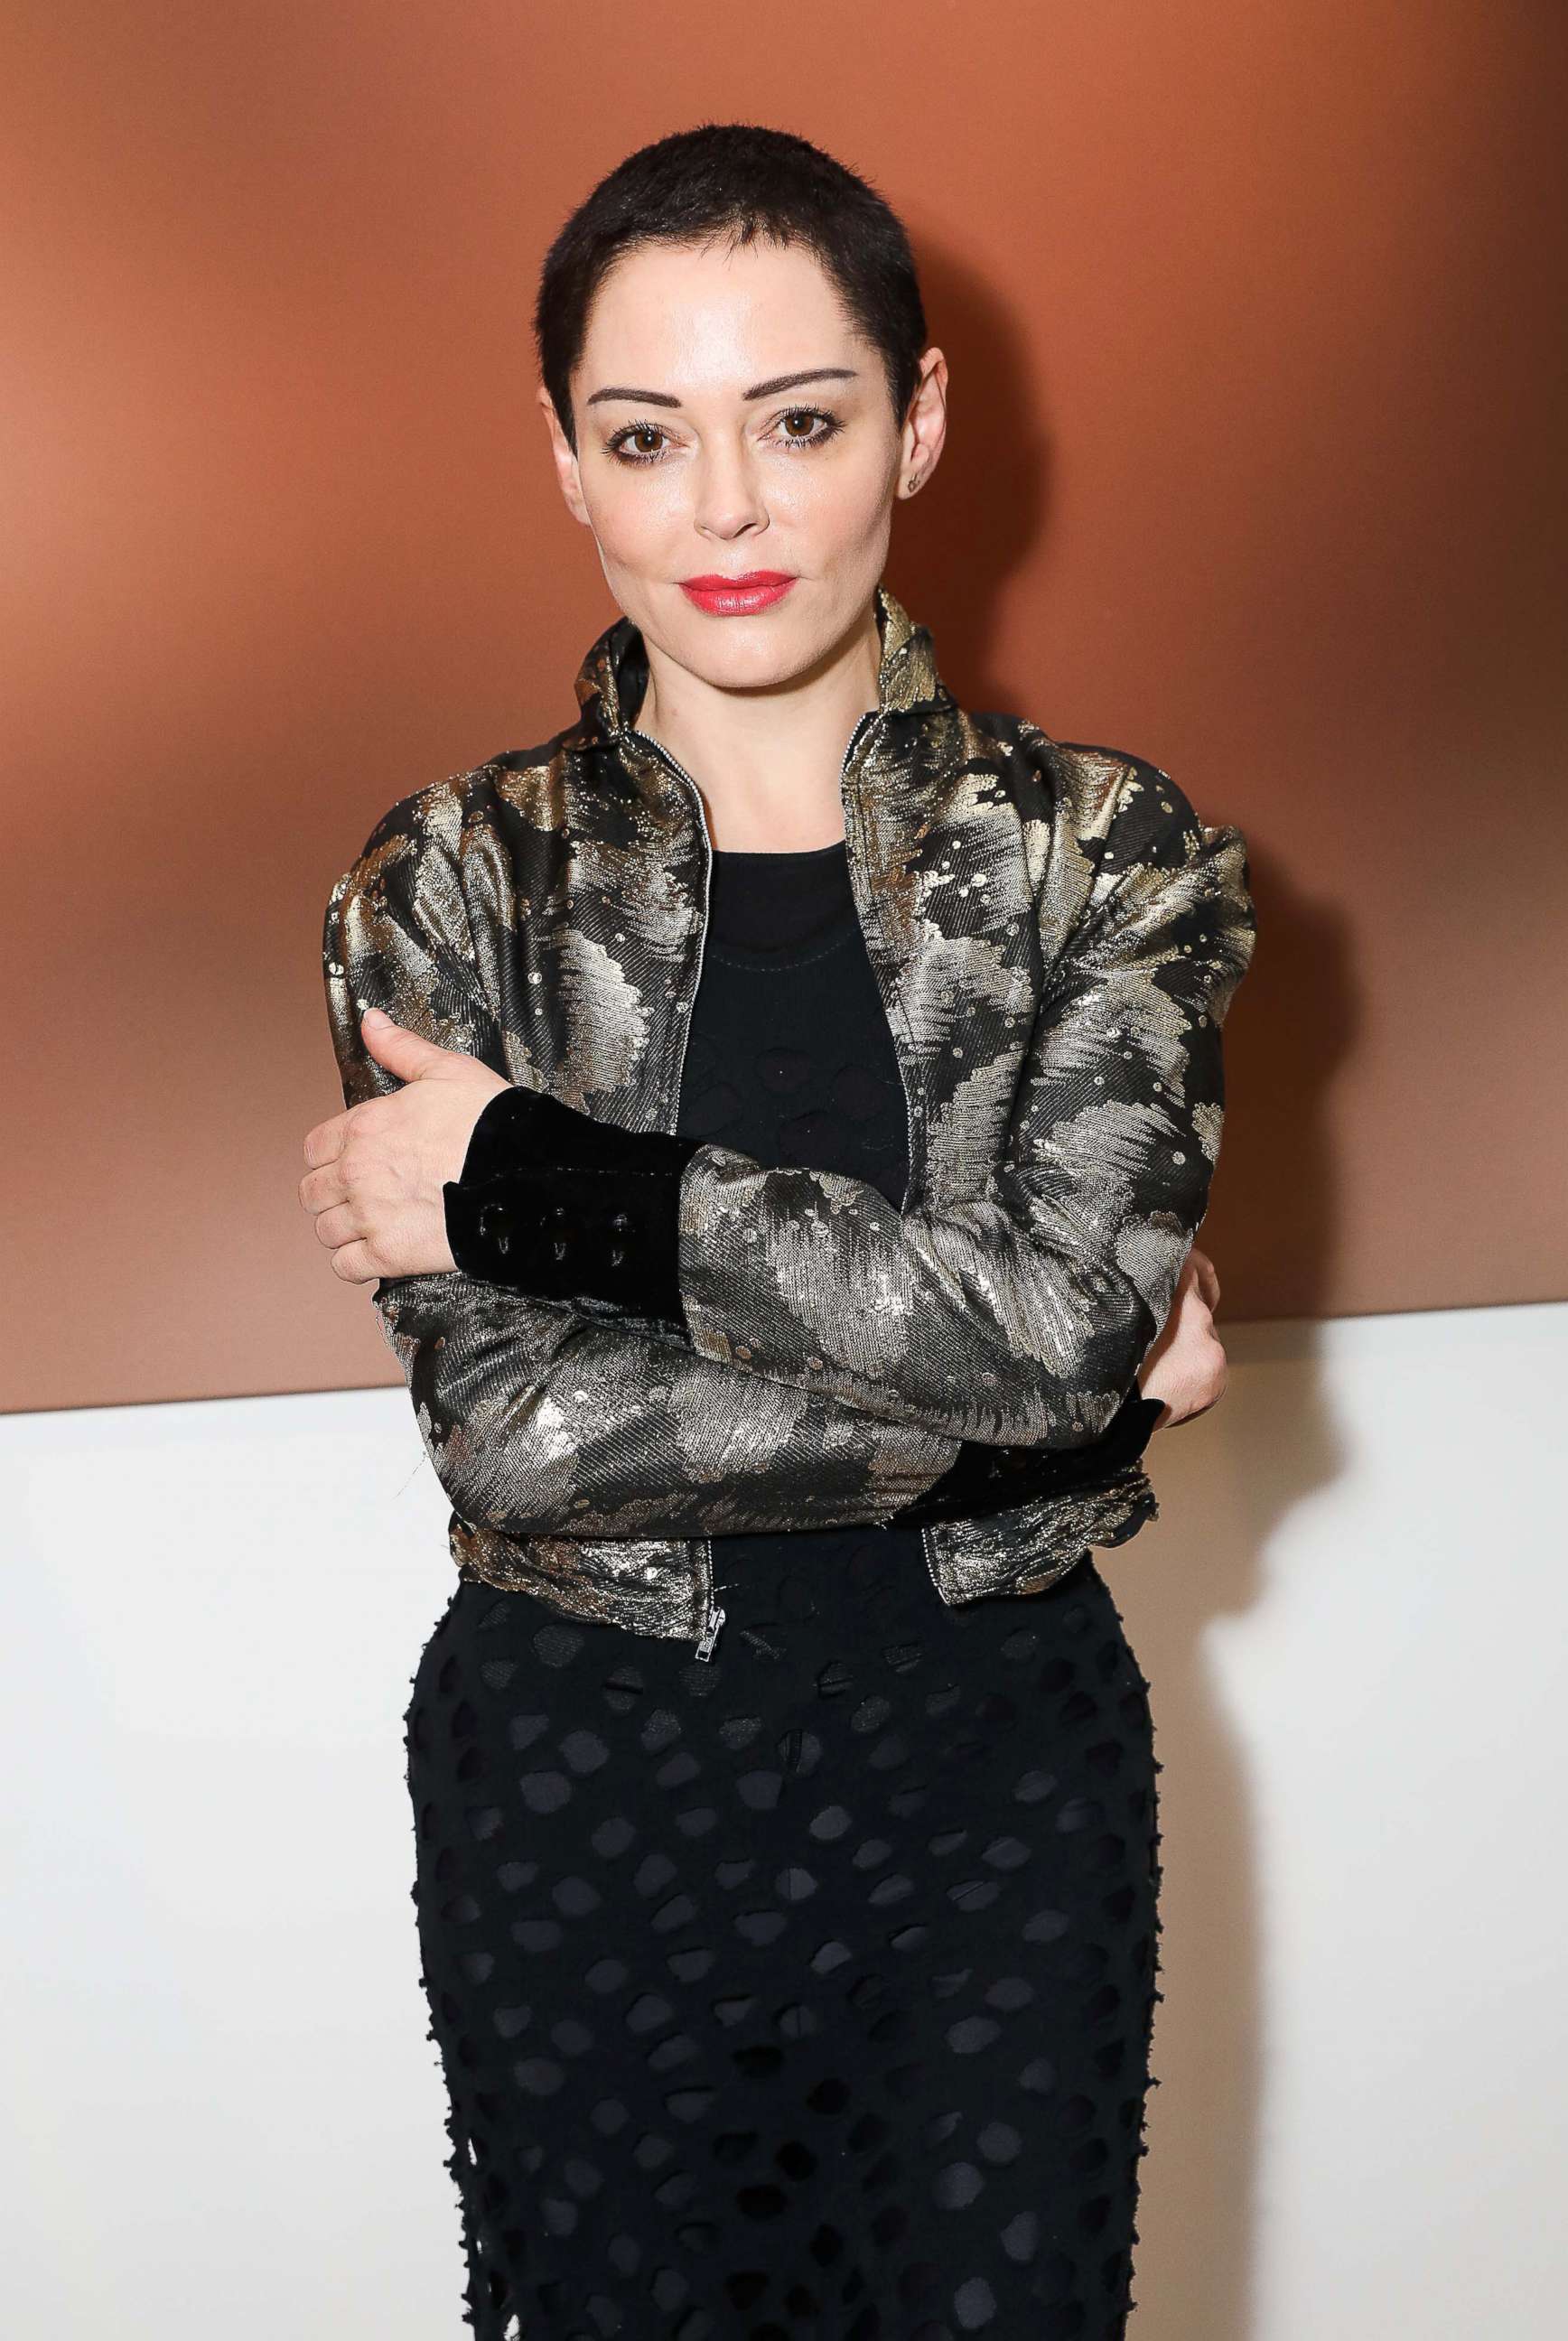 PHOTO: Rose McGowan attends a private view of Joe Corre's new exhibition "Ash From Chaos" at Lazinc, April 19, 2018, in London.